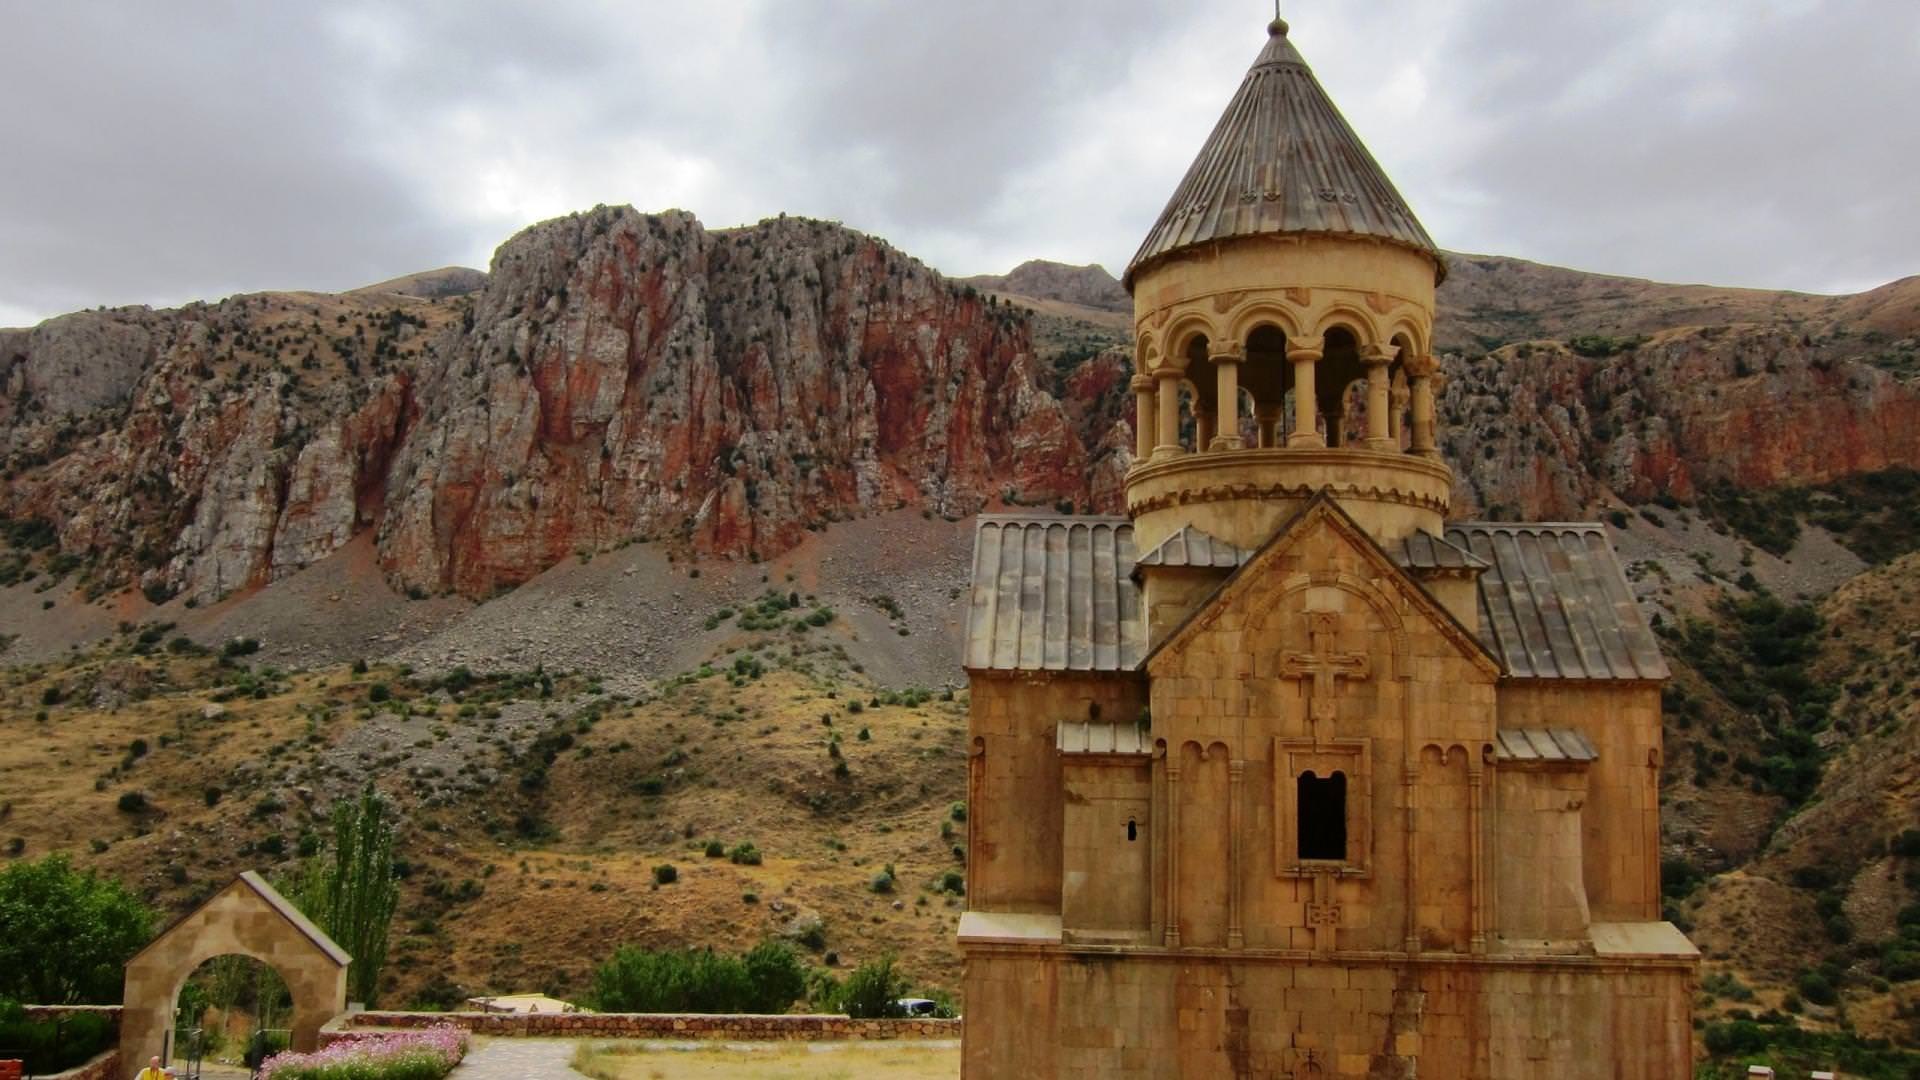 Armenia: Noravank, Located 122 km from Yerevan in a narrow gorge made by the Amaghu River. 1920x1080 Full HD Background.